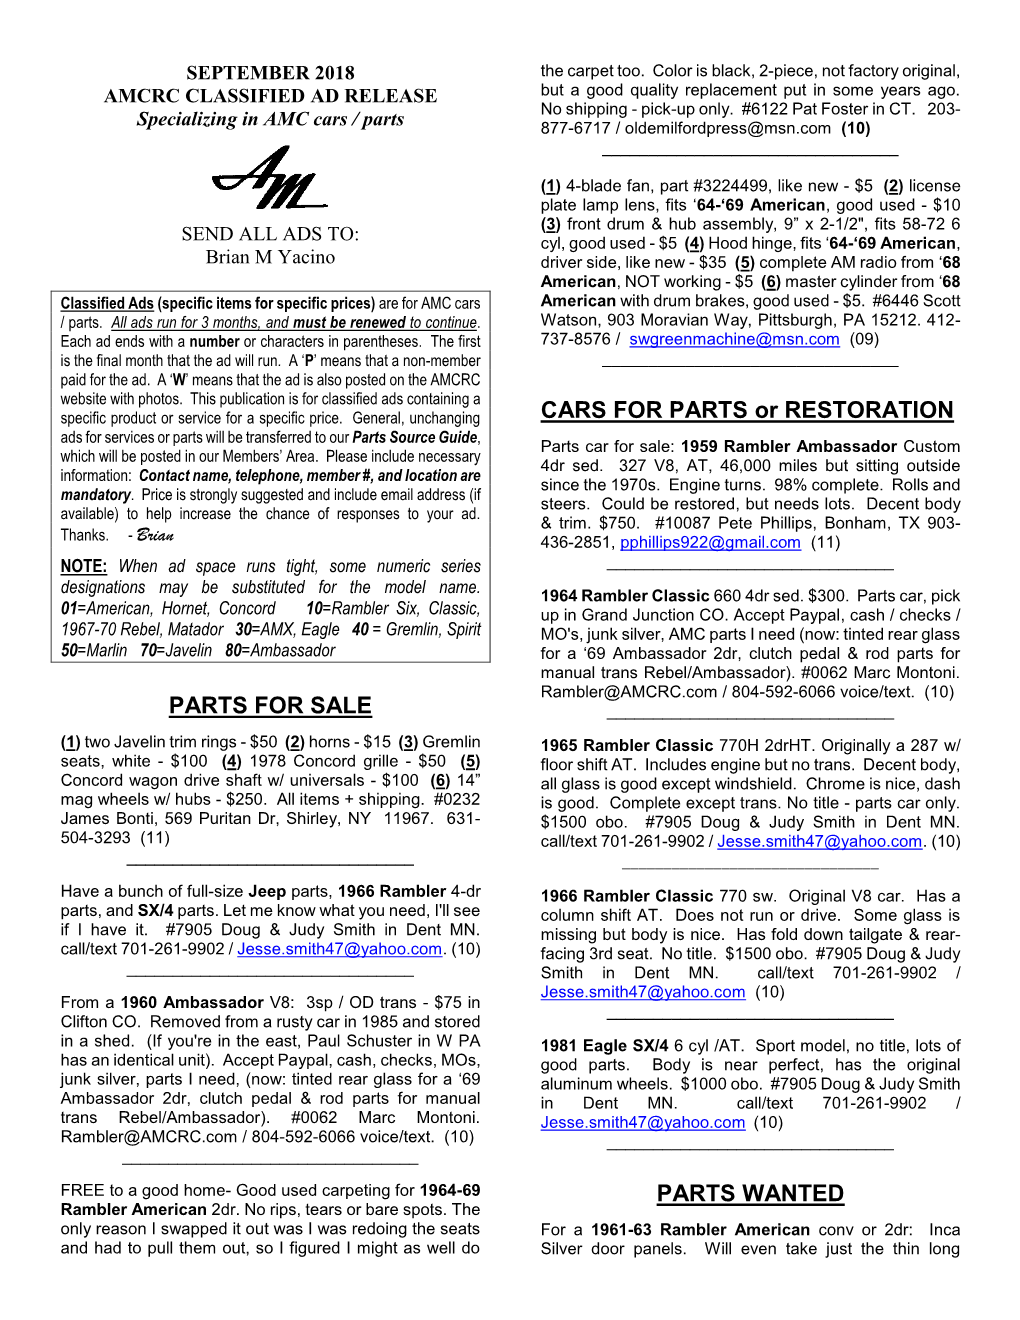 Amcrc Monthly News & Ad Release